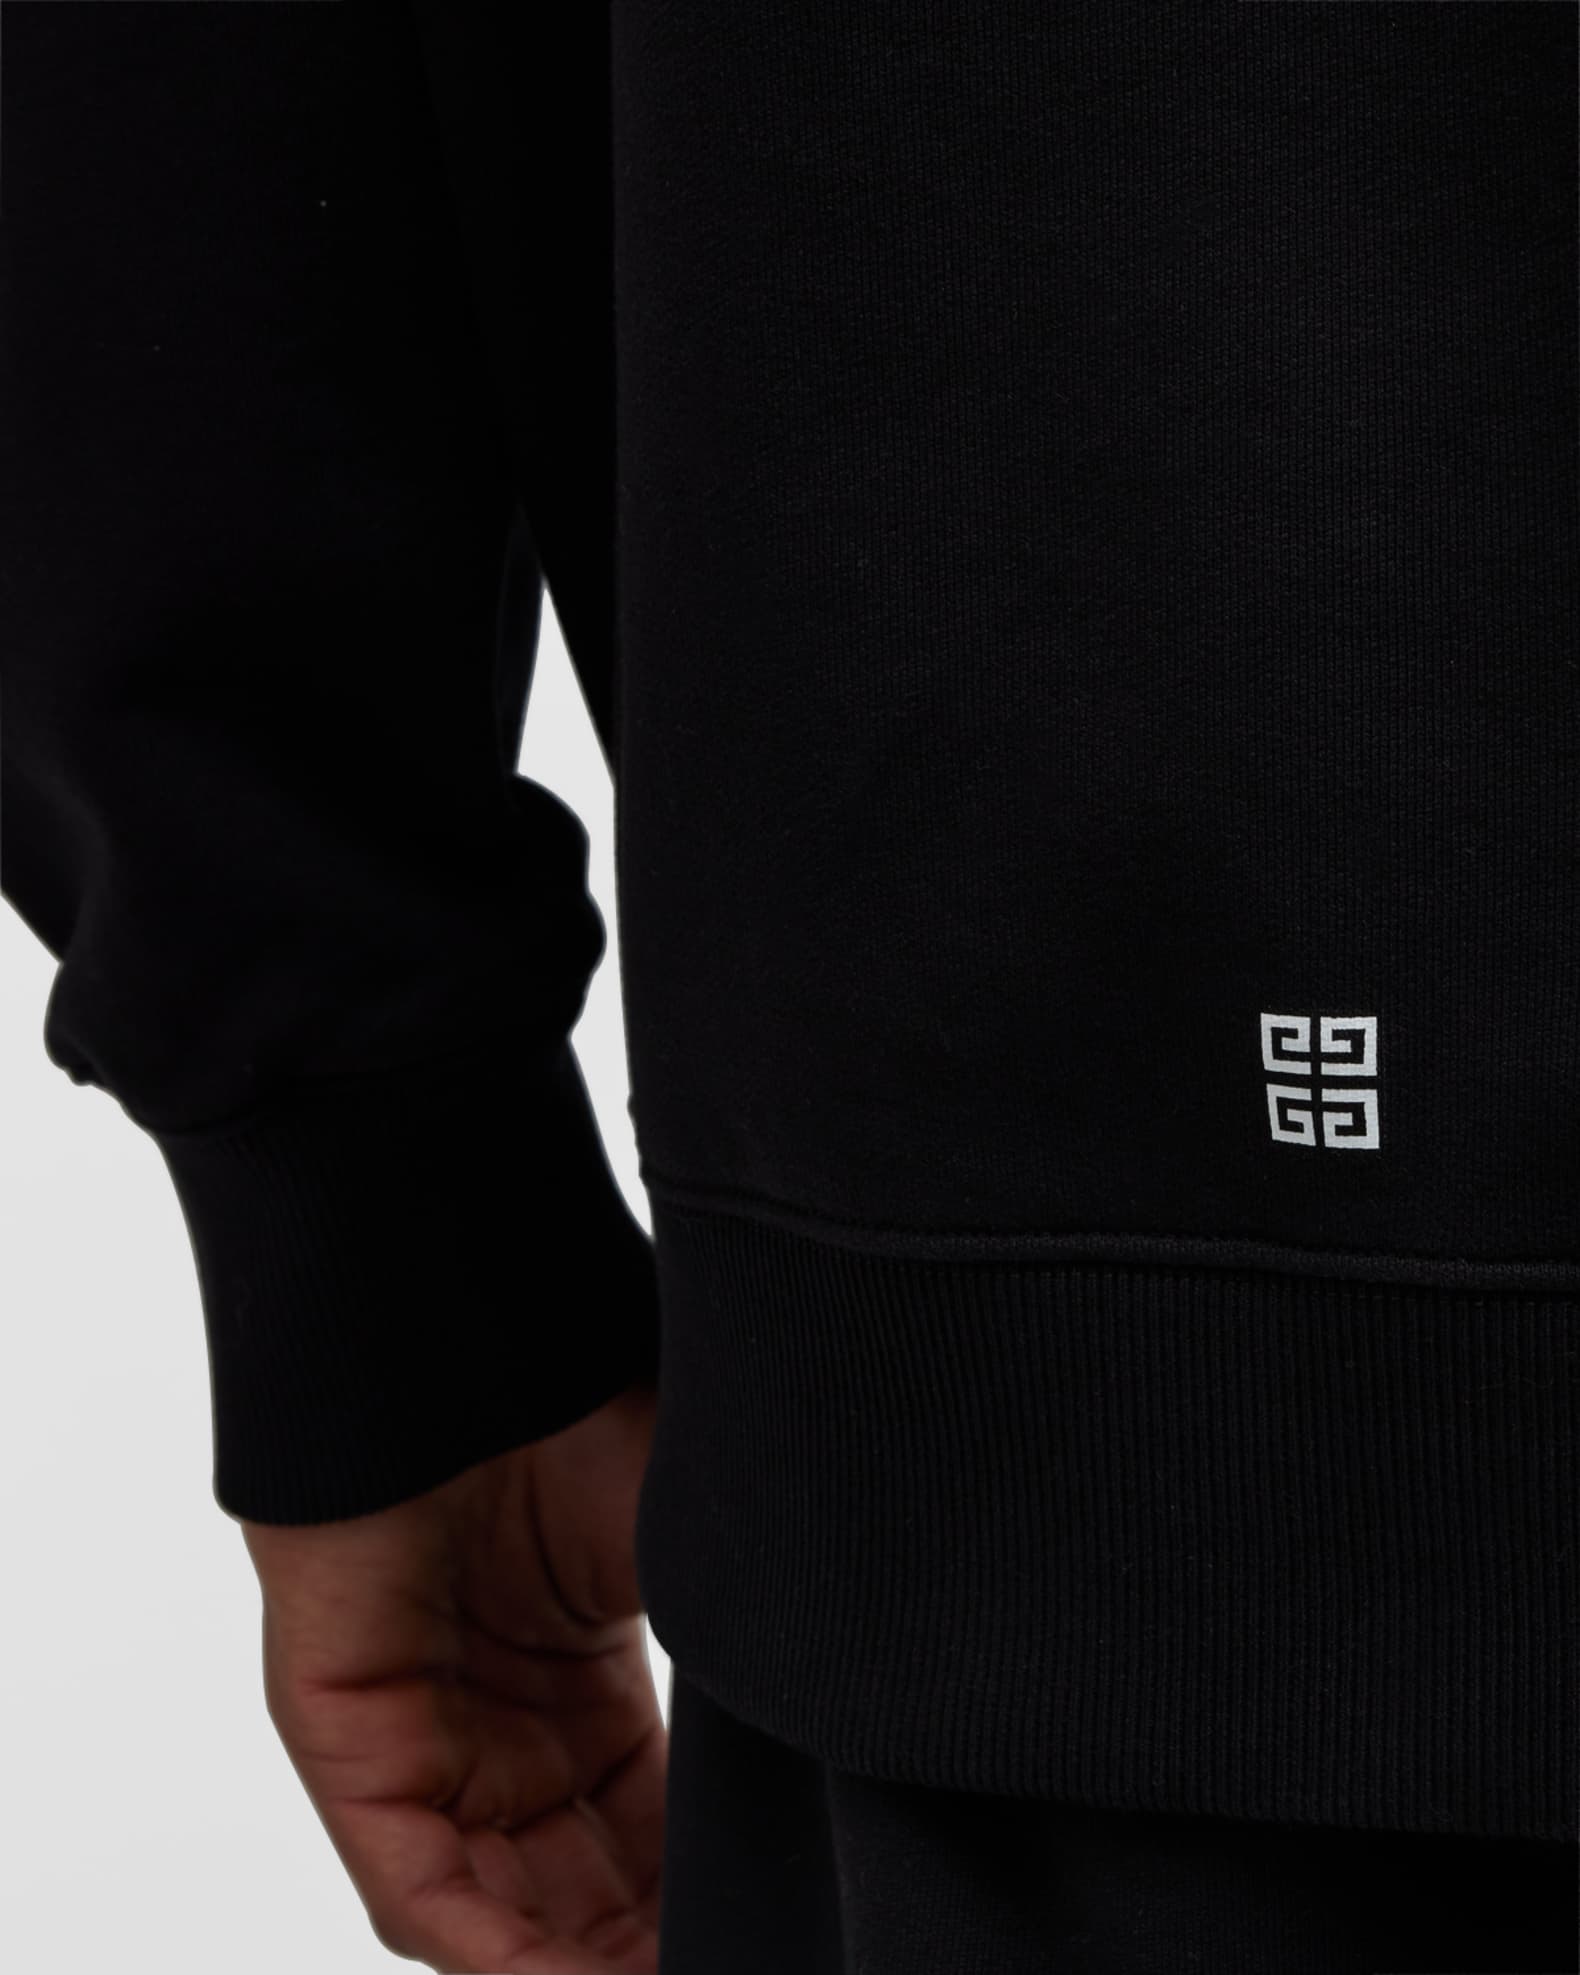 Givenchy 4g Cashmere Zip Hoodie in Black